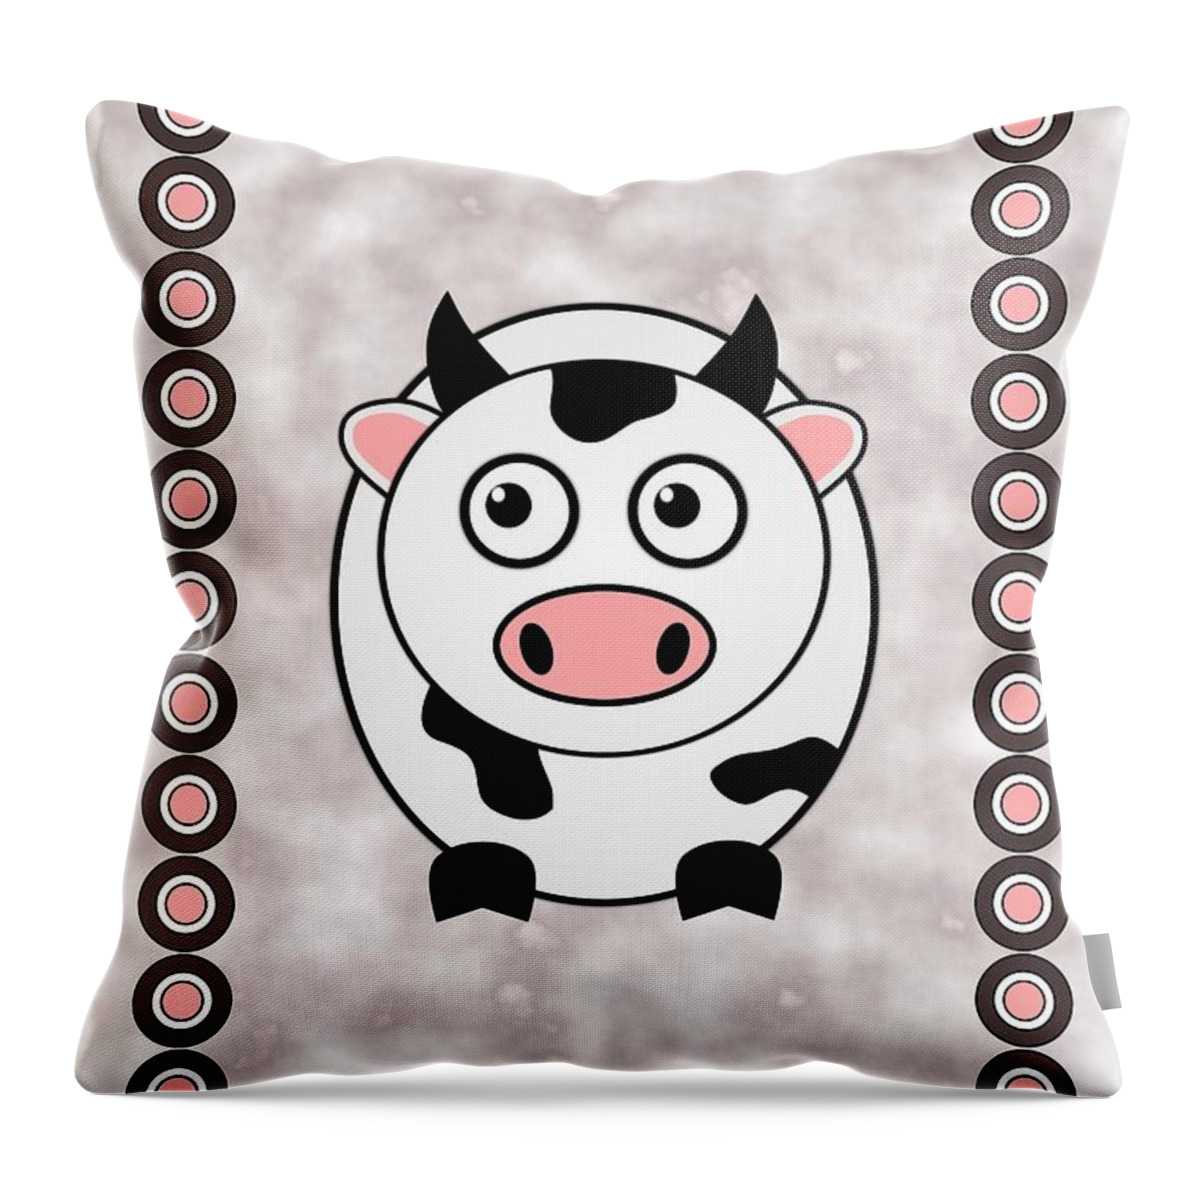 Cow Throw Pillow featuring the digital art Cow - Animals - Art for Kids by Anastasiya Malakhova